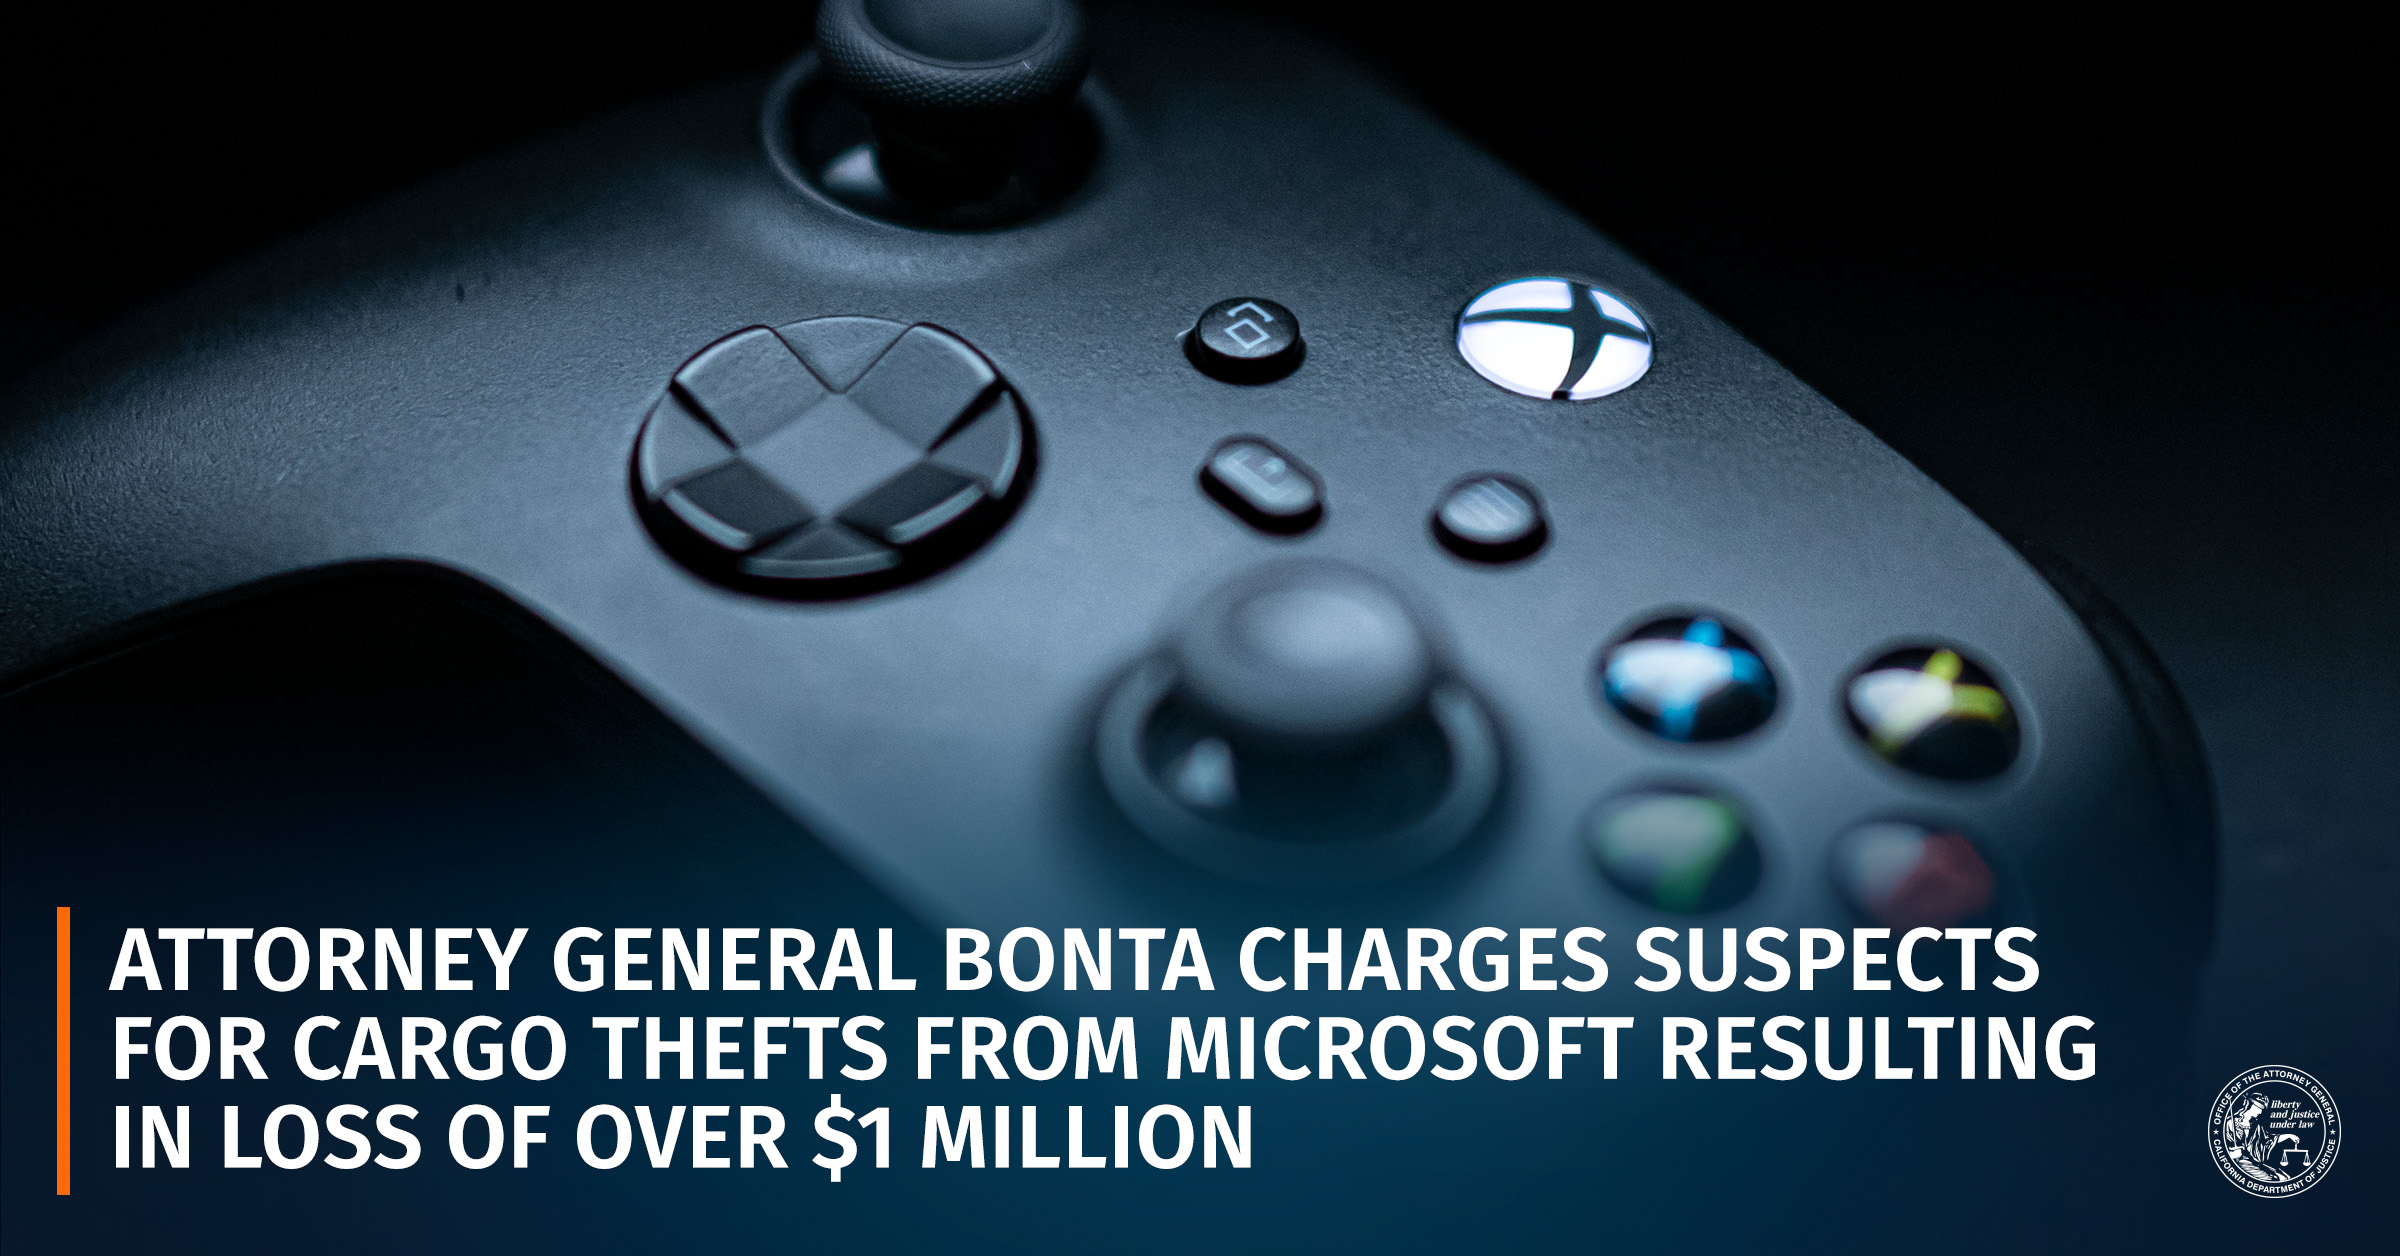 Attorney General Bonta Charges Suspects for Cargo Thefts from Microsoft Resulting in Loss of Over $1 Million